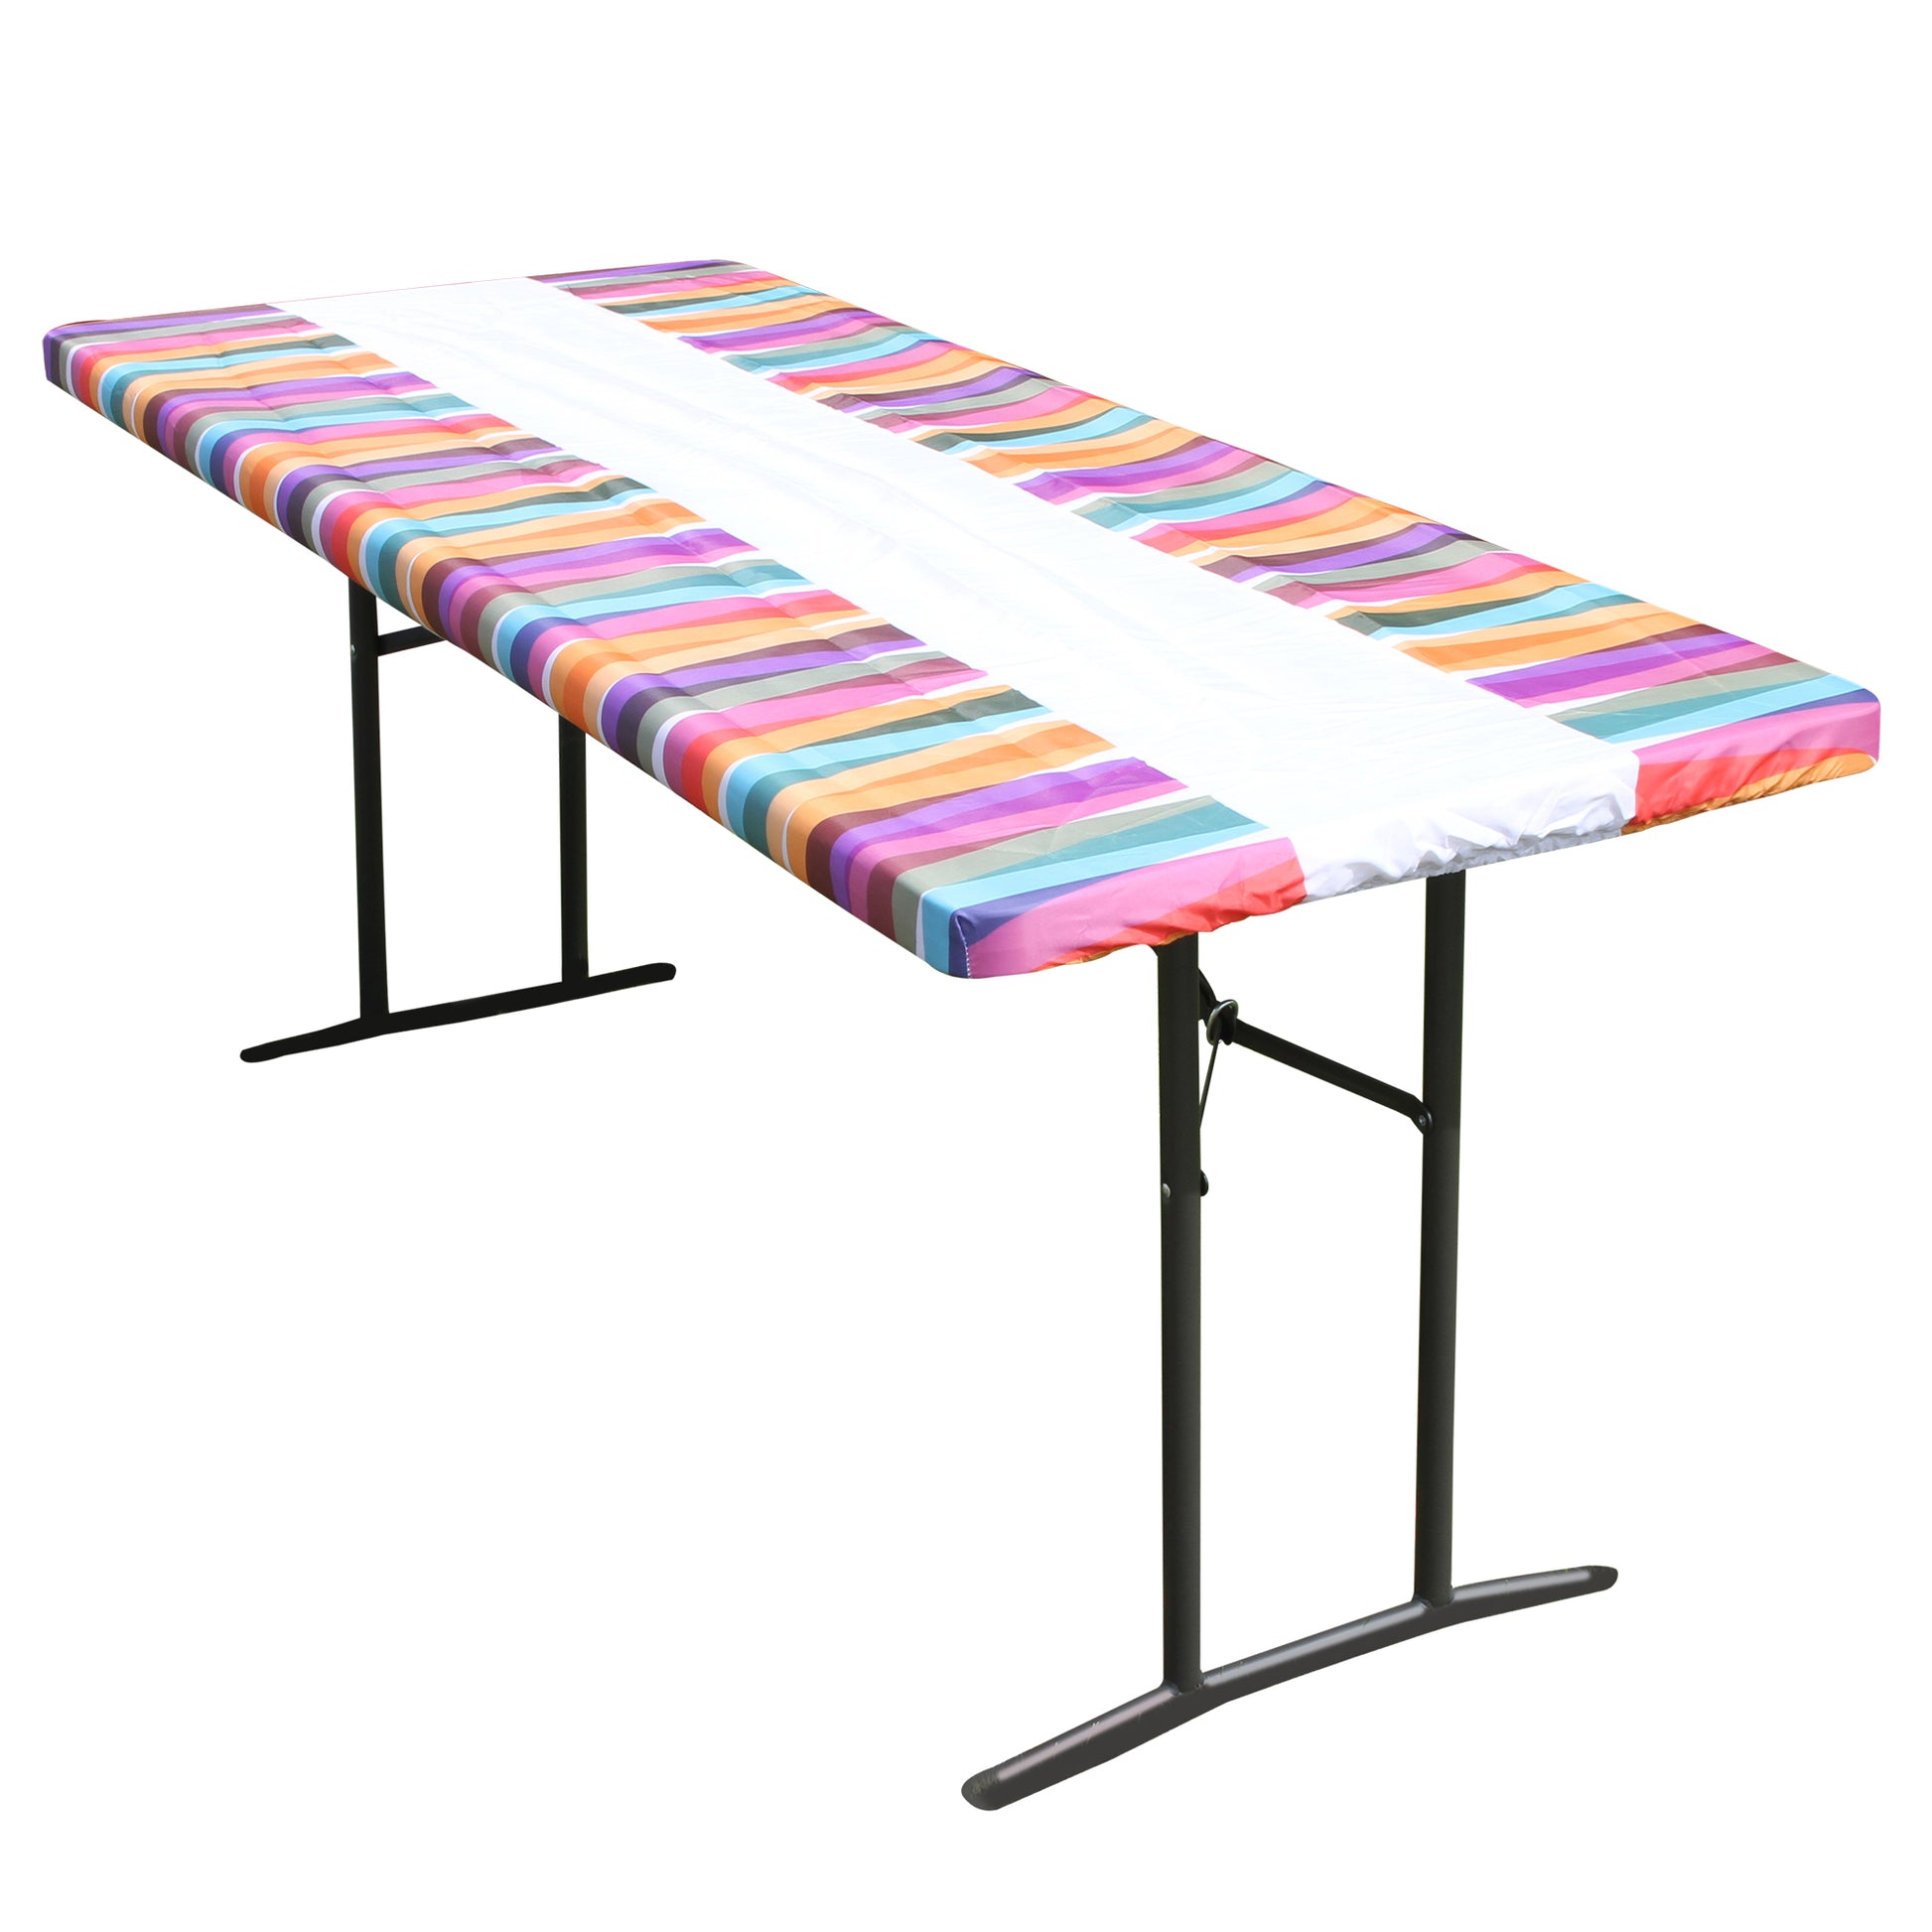 TableCloth PLUS 96" Laces Fitted Polyester Tablecloth for 8' Folding Tables displayed adorning a folding table